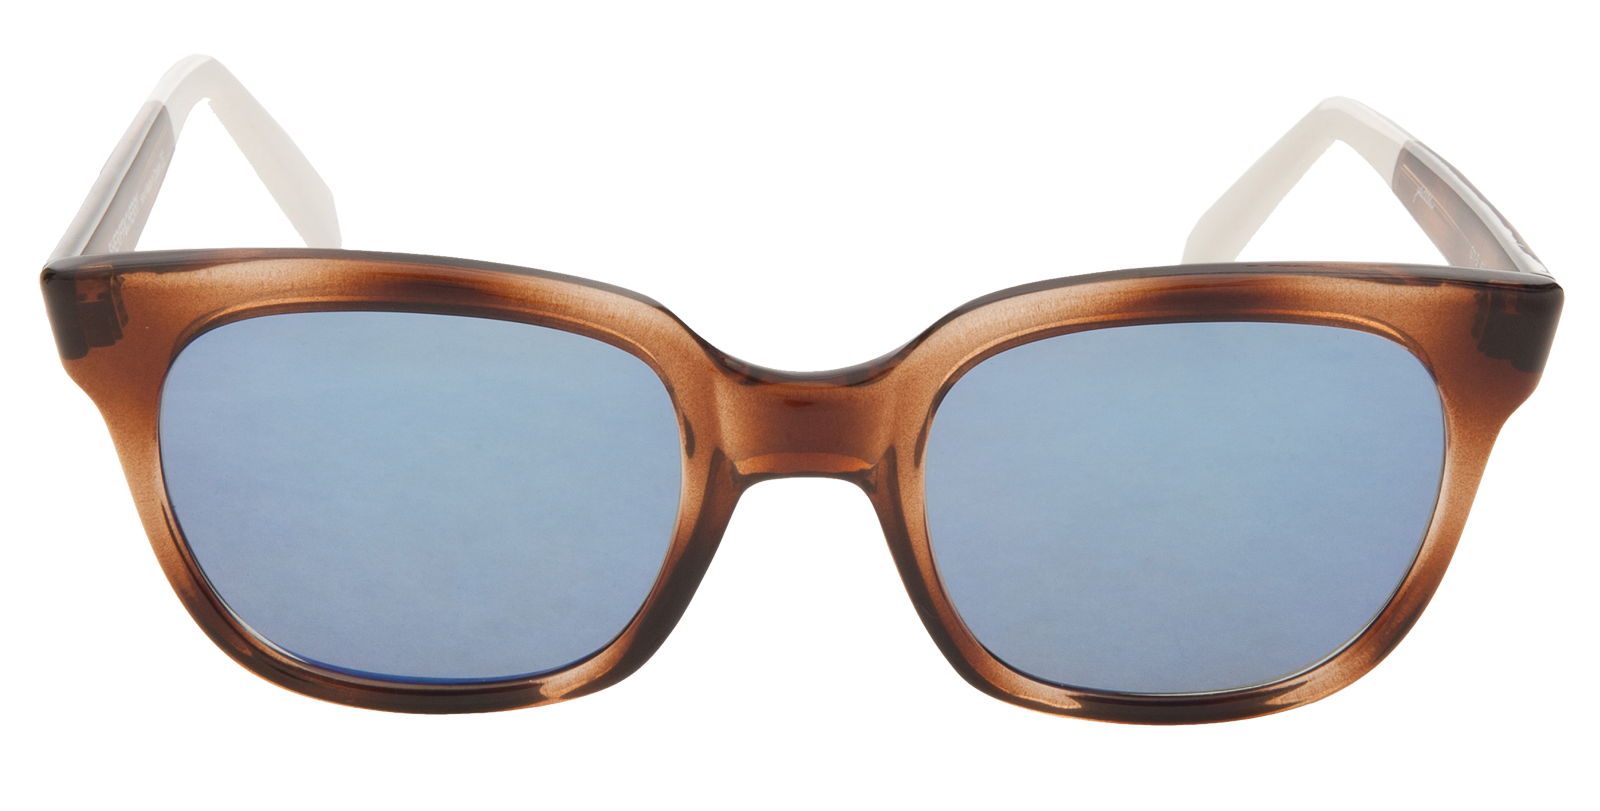 Sheriff and Cherry Turtle Cut Sunglasses blue lenses